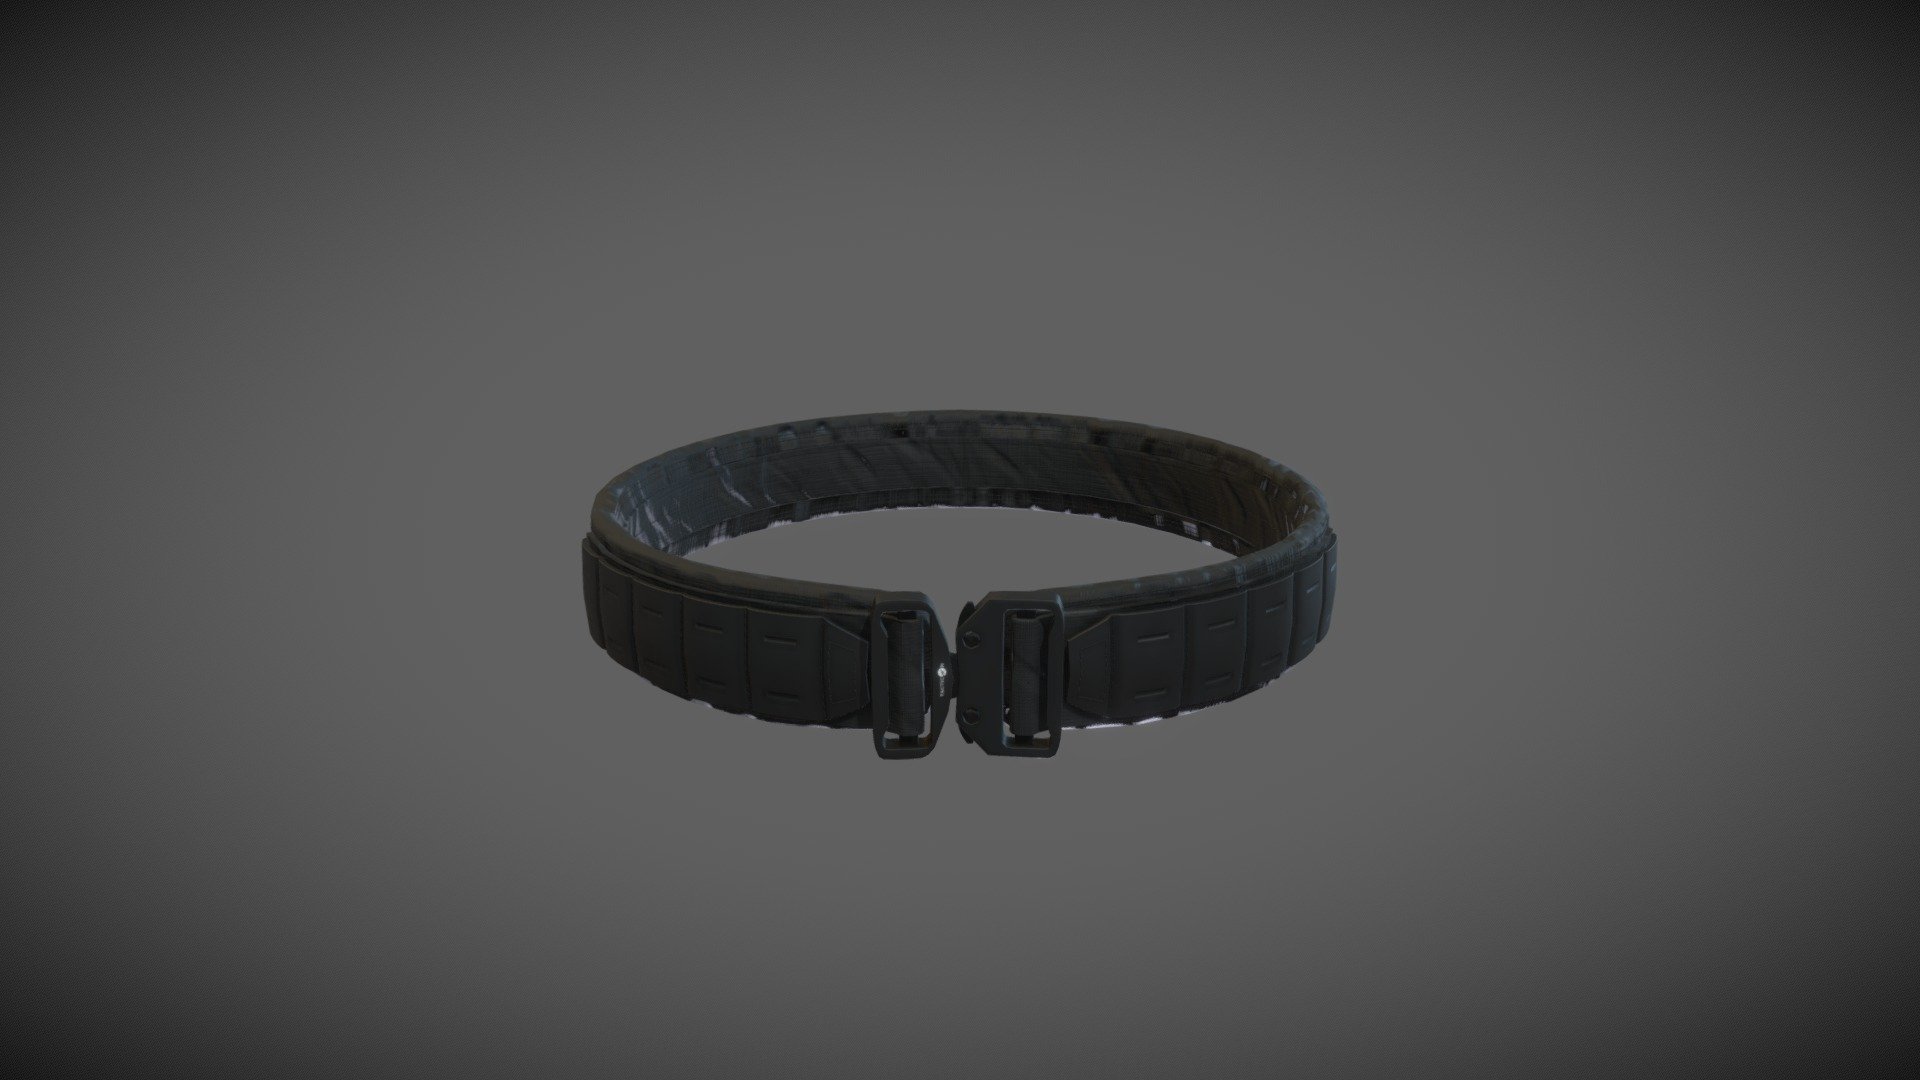 tactical belt (model example).
Low-poly model ready for VR, AR, games and other real-time apps. Perfectly for FPS. Every model has been checked with the appropriate software 3d model